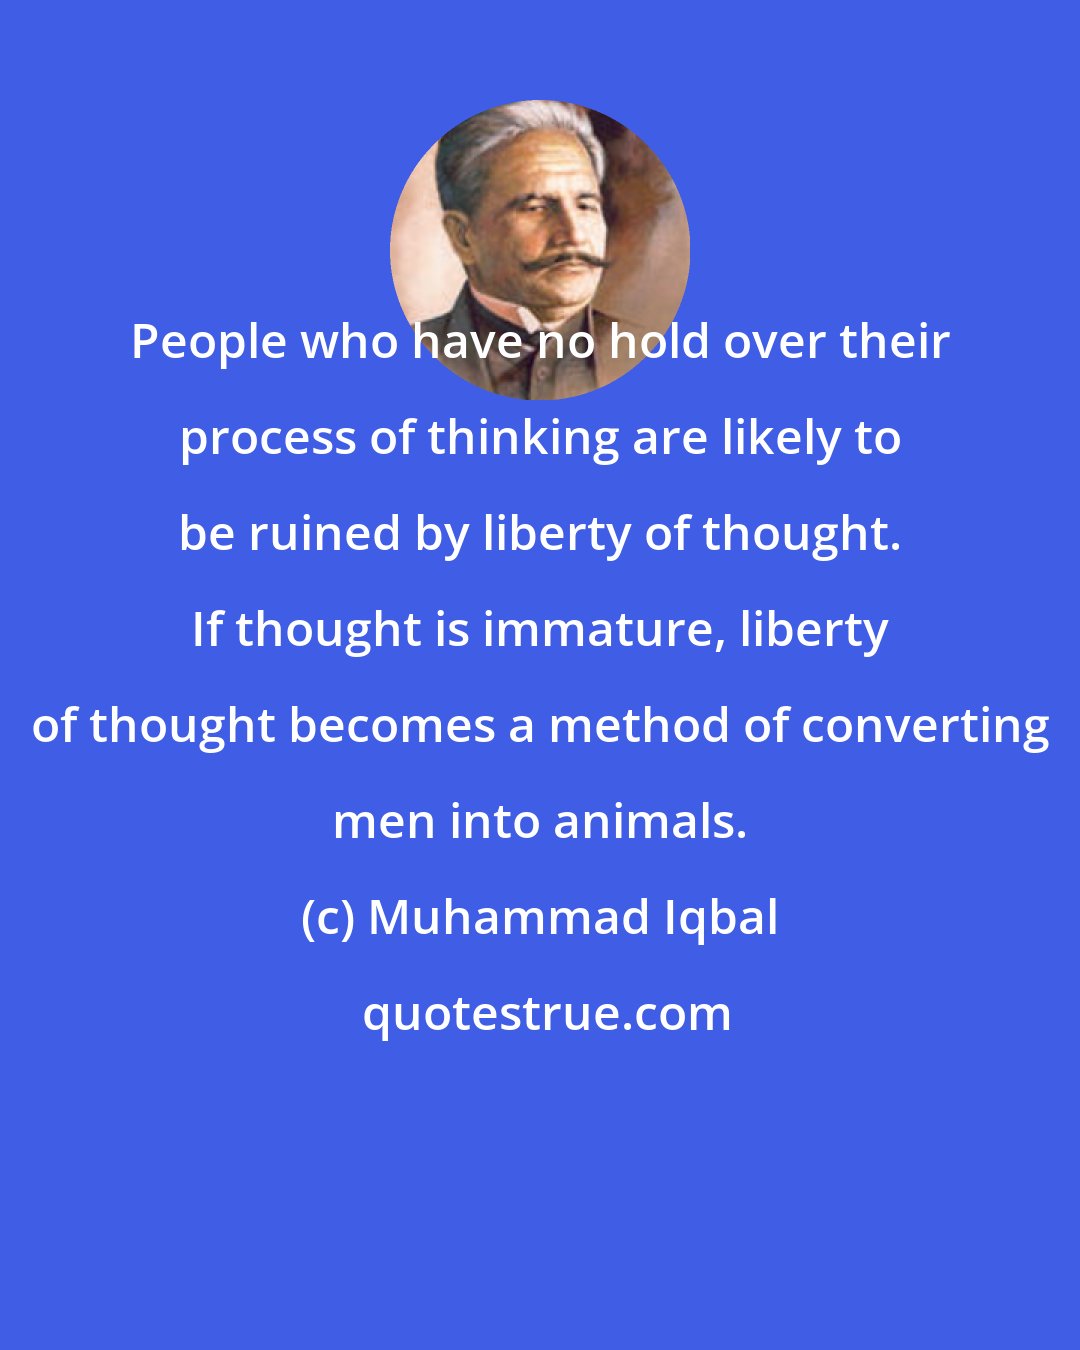 Muhammad Iqbal: People who have no hold over their process of thinking are likely to be ruined by liberty of thought. If thought is immature, liberty of thought becomes a method of converting men into animals.